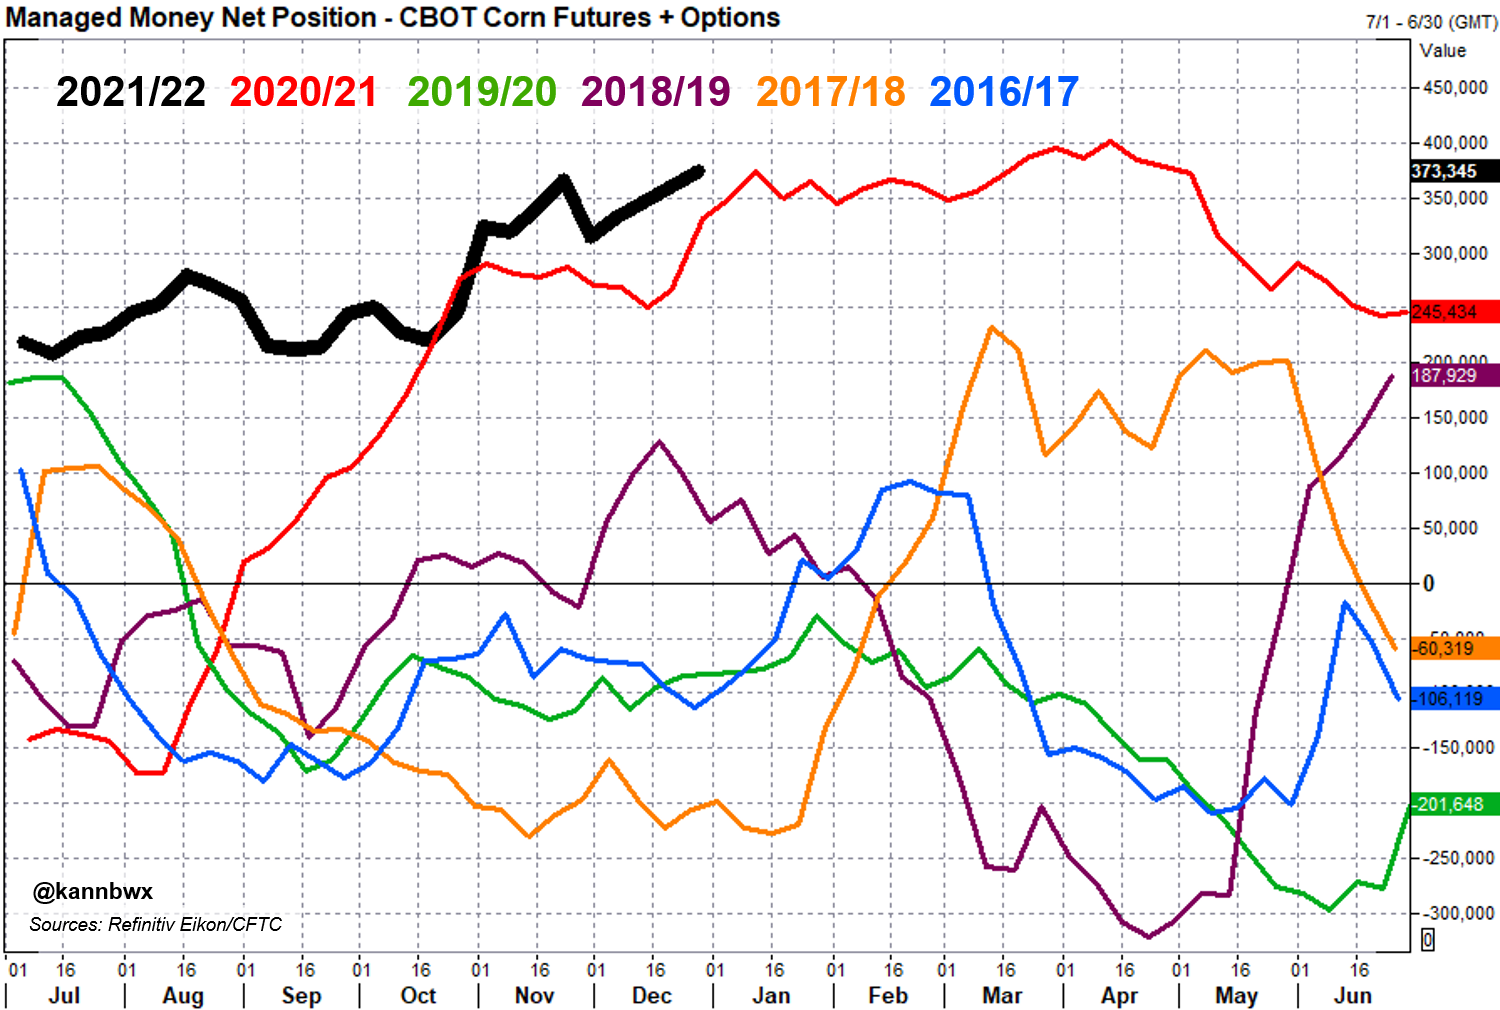 Managing the net monetary position on CBOT corn futures and options